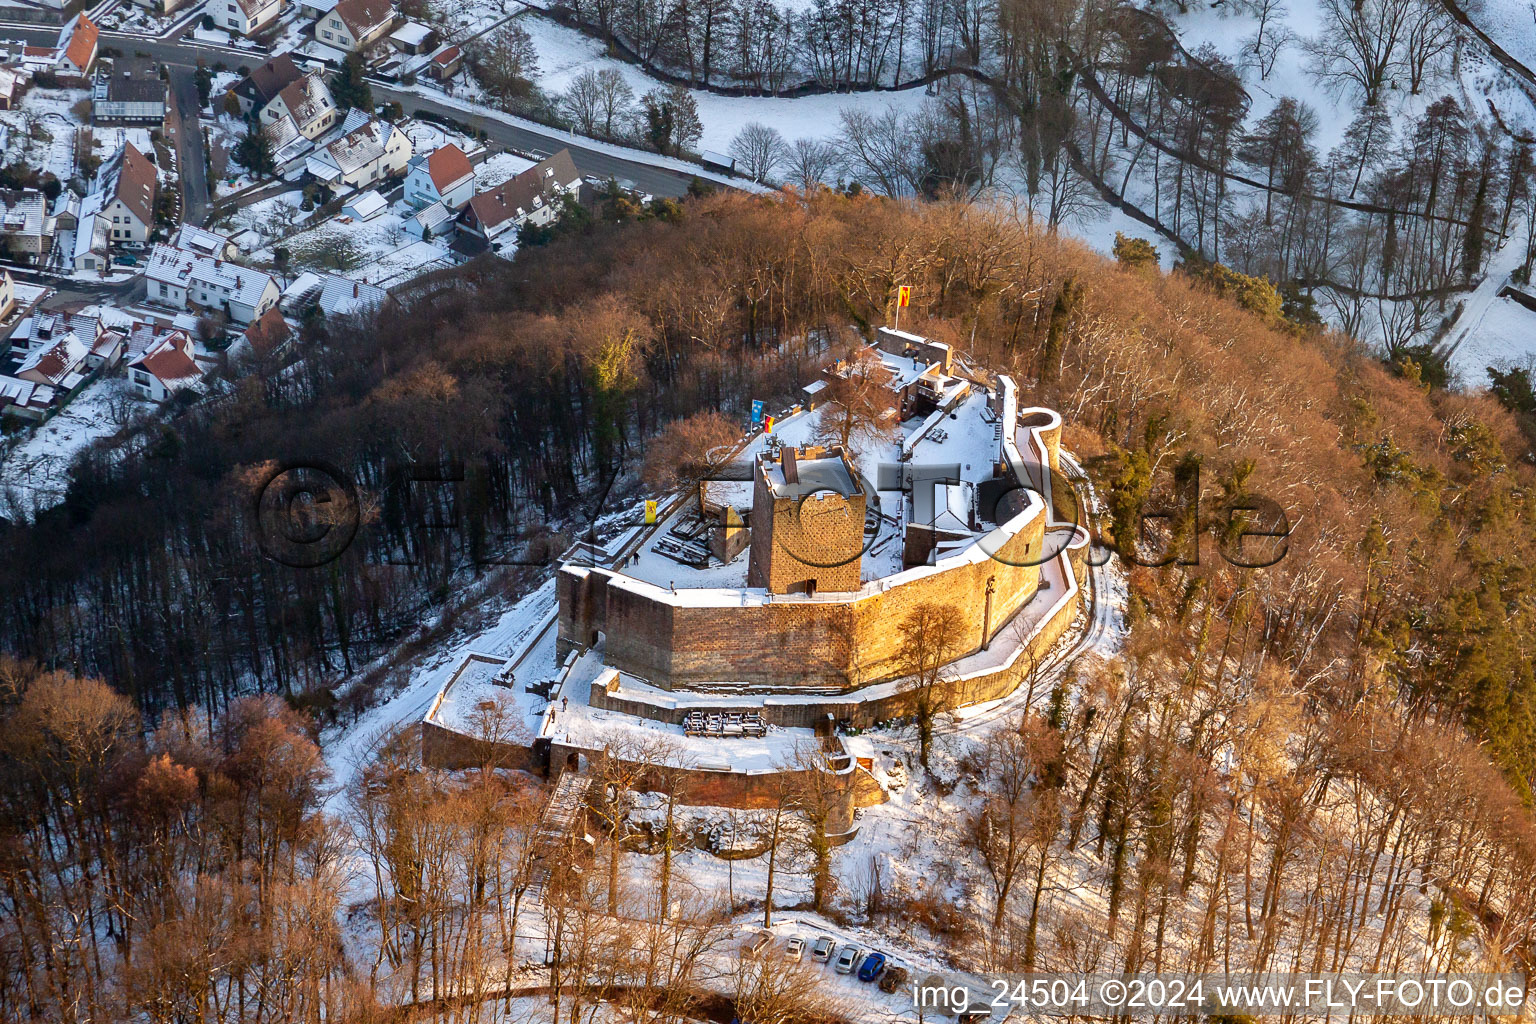 Landeck ruins in Klingenmünster in the state Rhineland-Palatinate, Germany seen from above